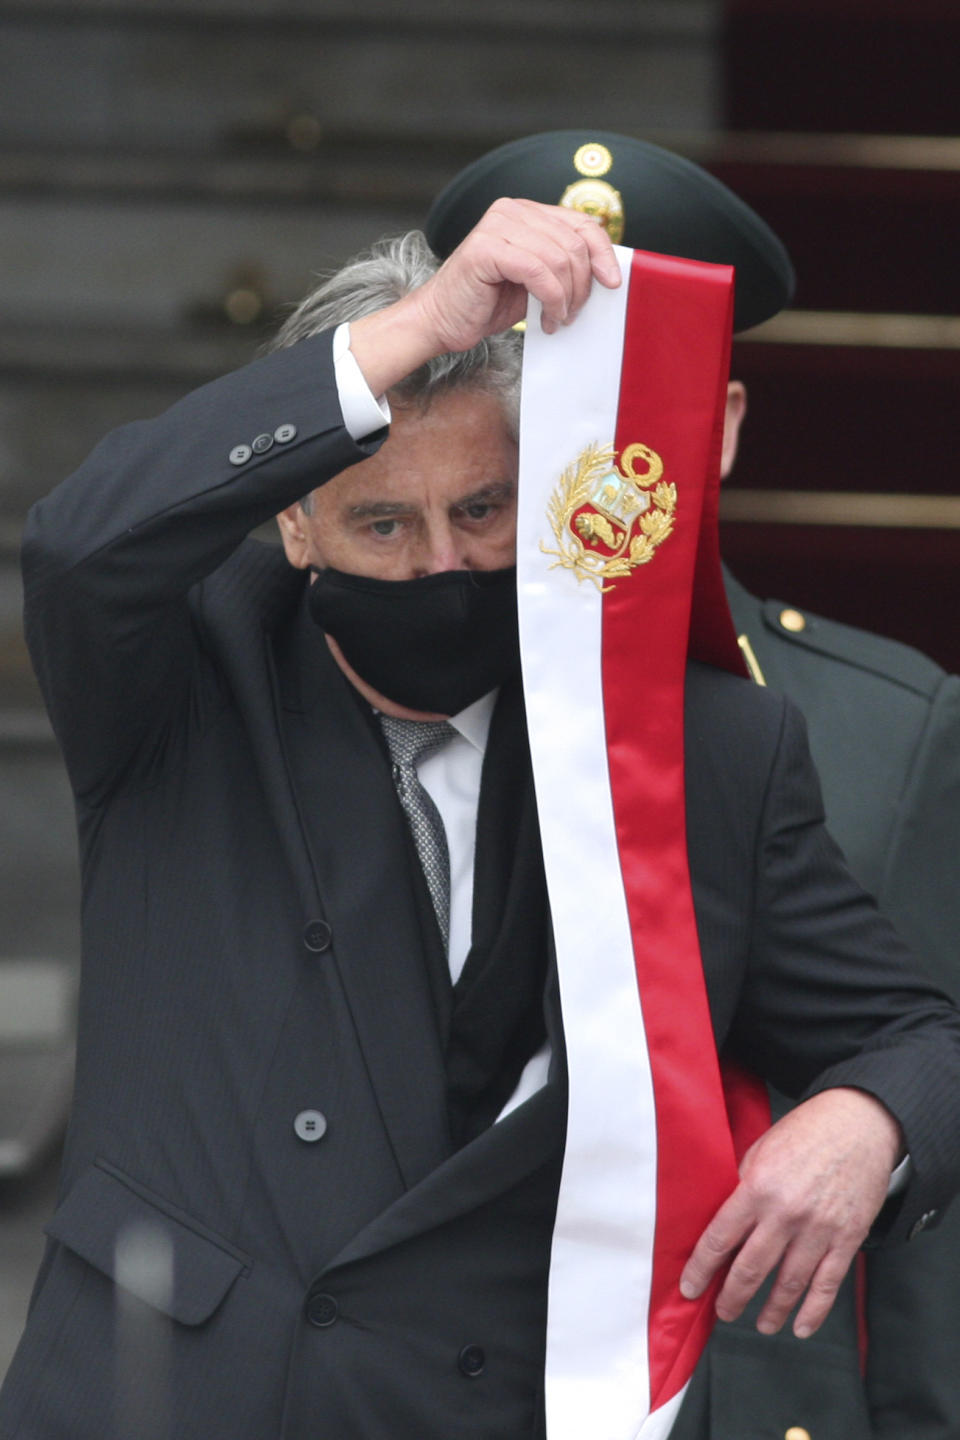 Peru's outgoing President Francisco Sagasti removes his presidential sash outside Congress before the inauguration of President-elect Pedro Castillo in Lima, Peru, Wednesday, July 28, 2021. (AP Photo/Francisco Rodriguez)